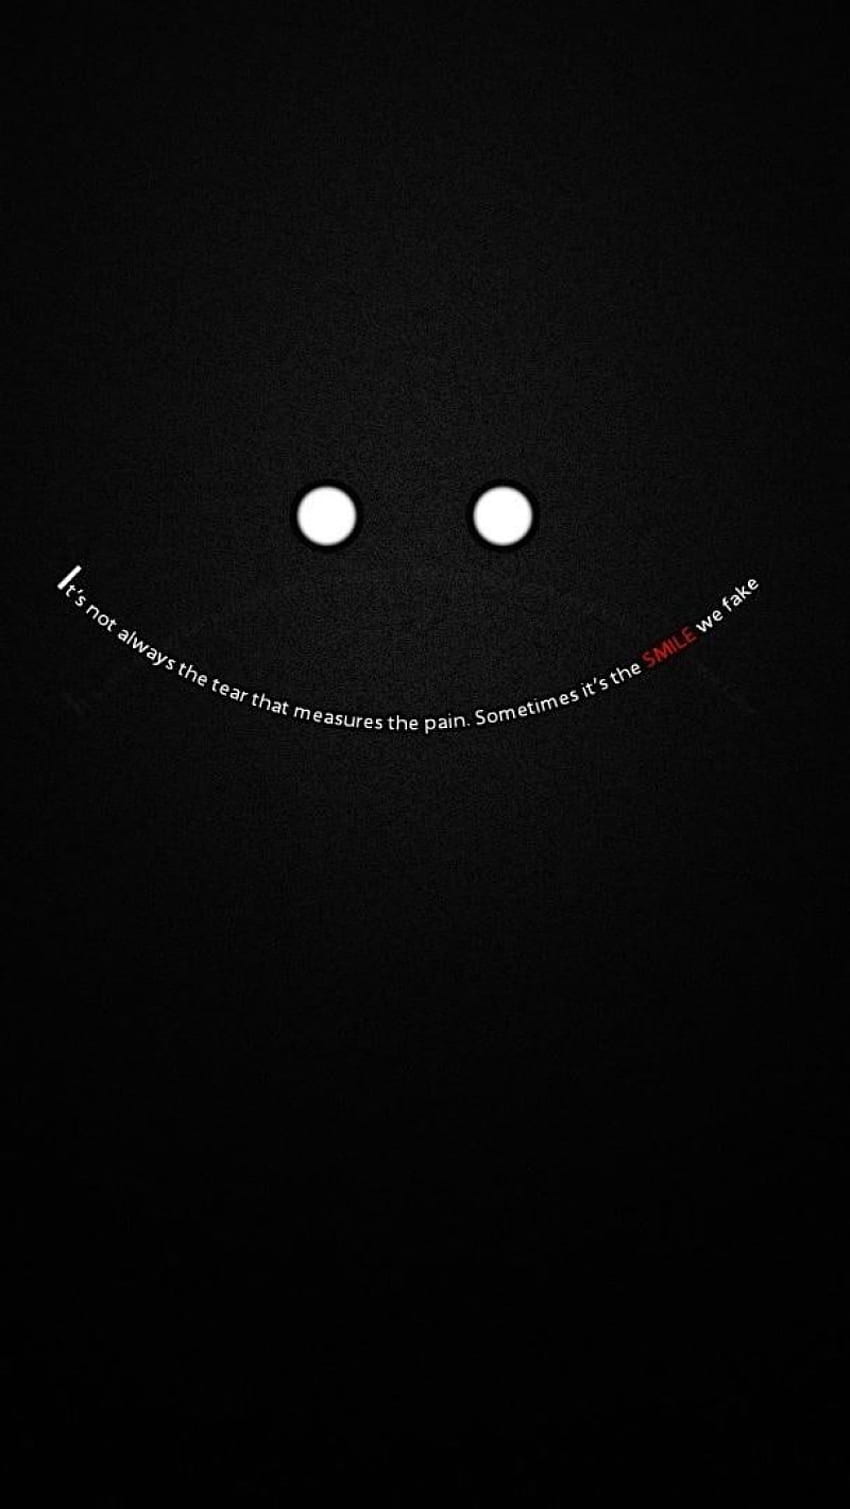 fake, smile, pain, depression quote, inside, black • For You For & Mobile, Depression Phone HD phone wallpaper